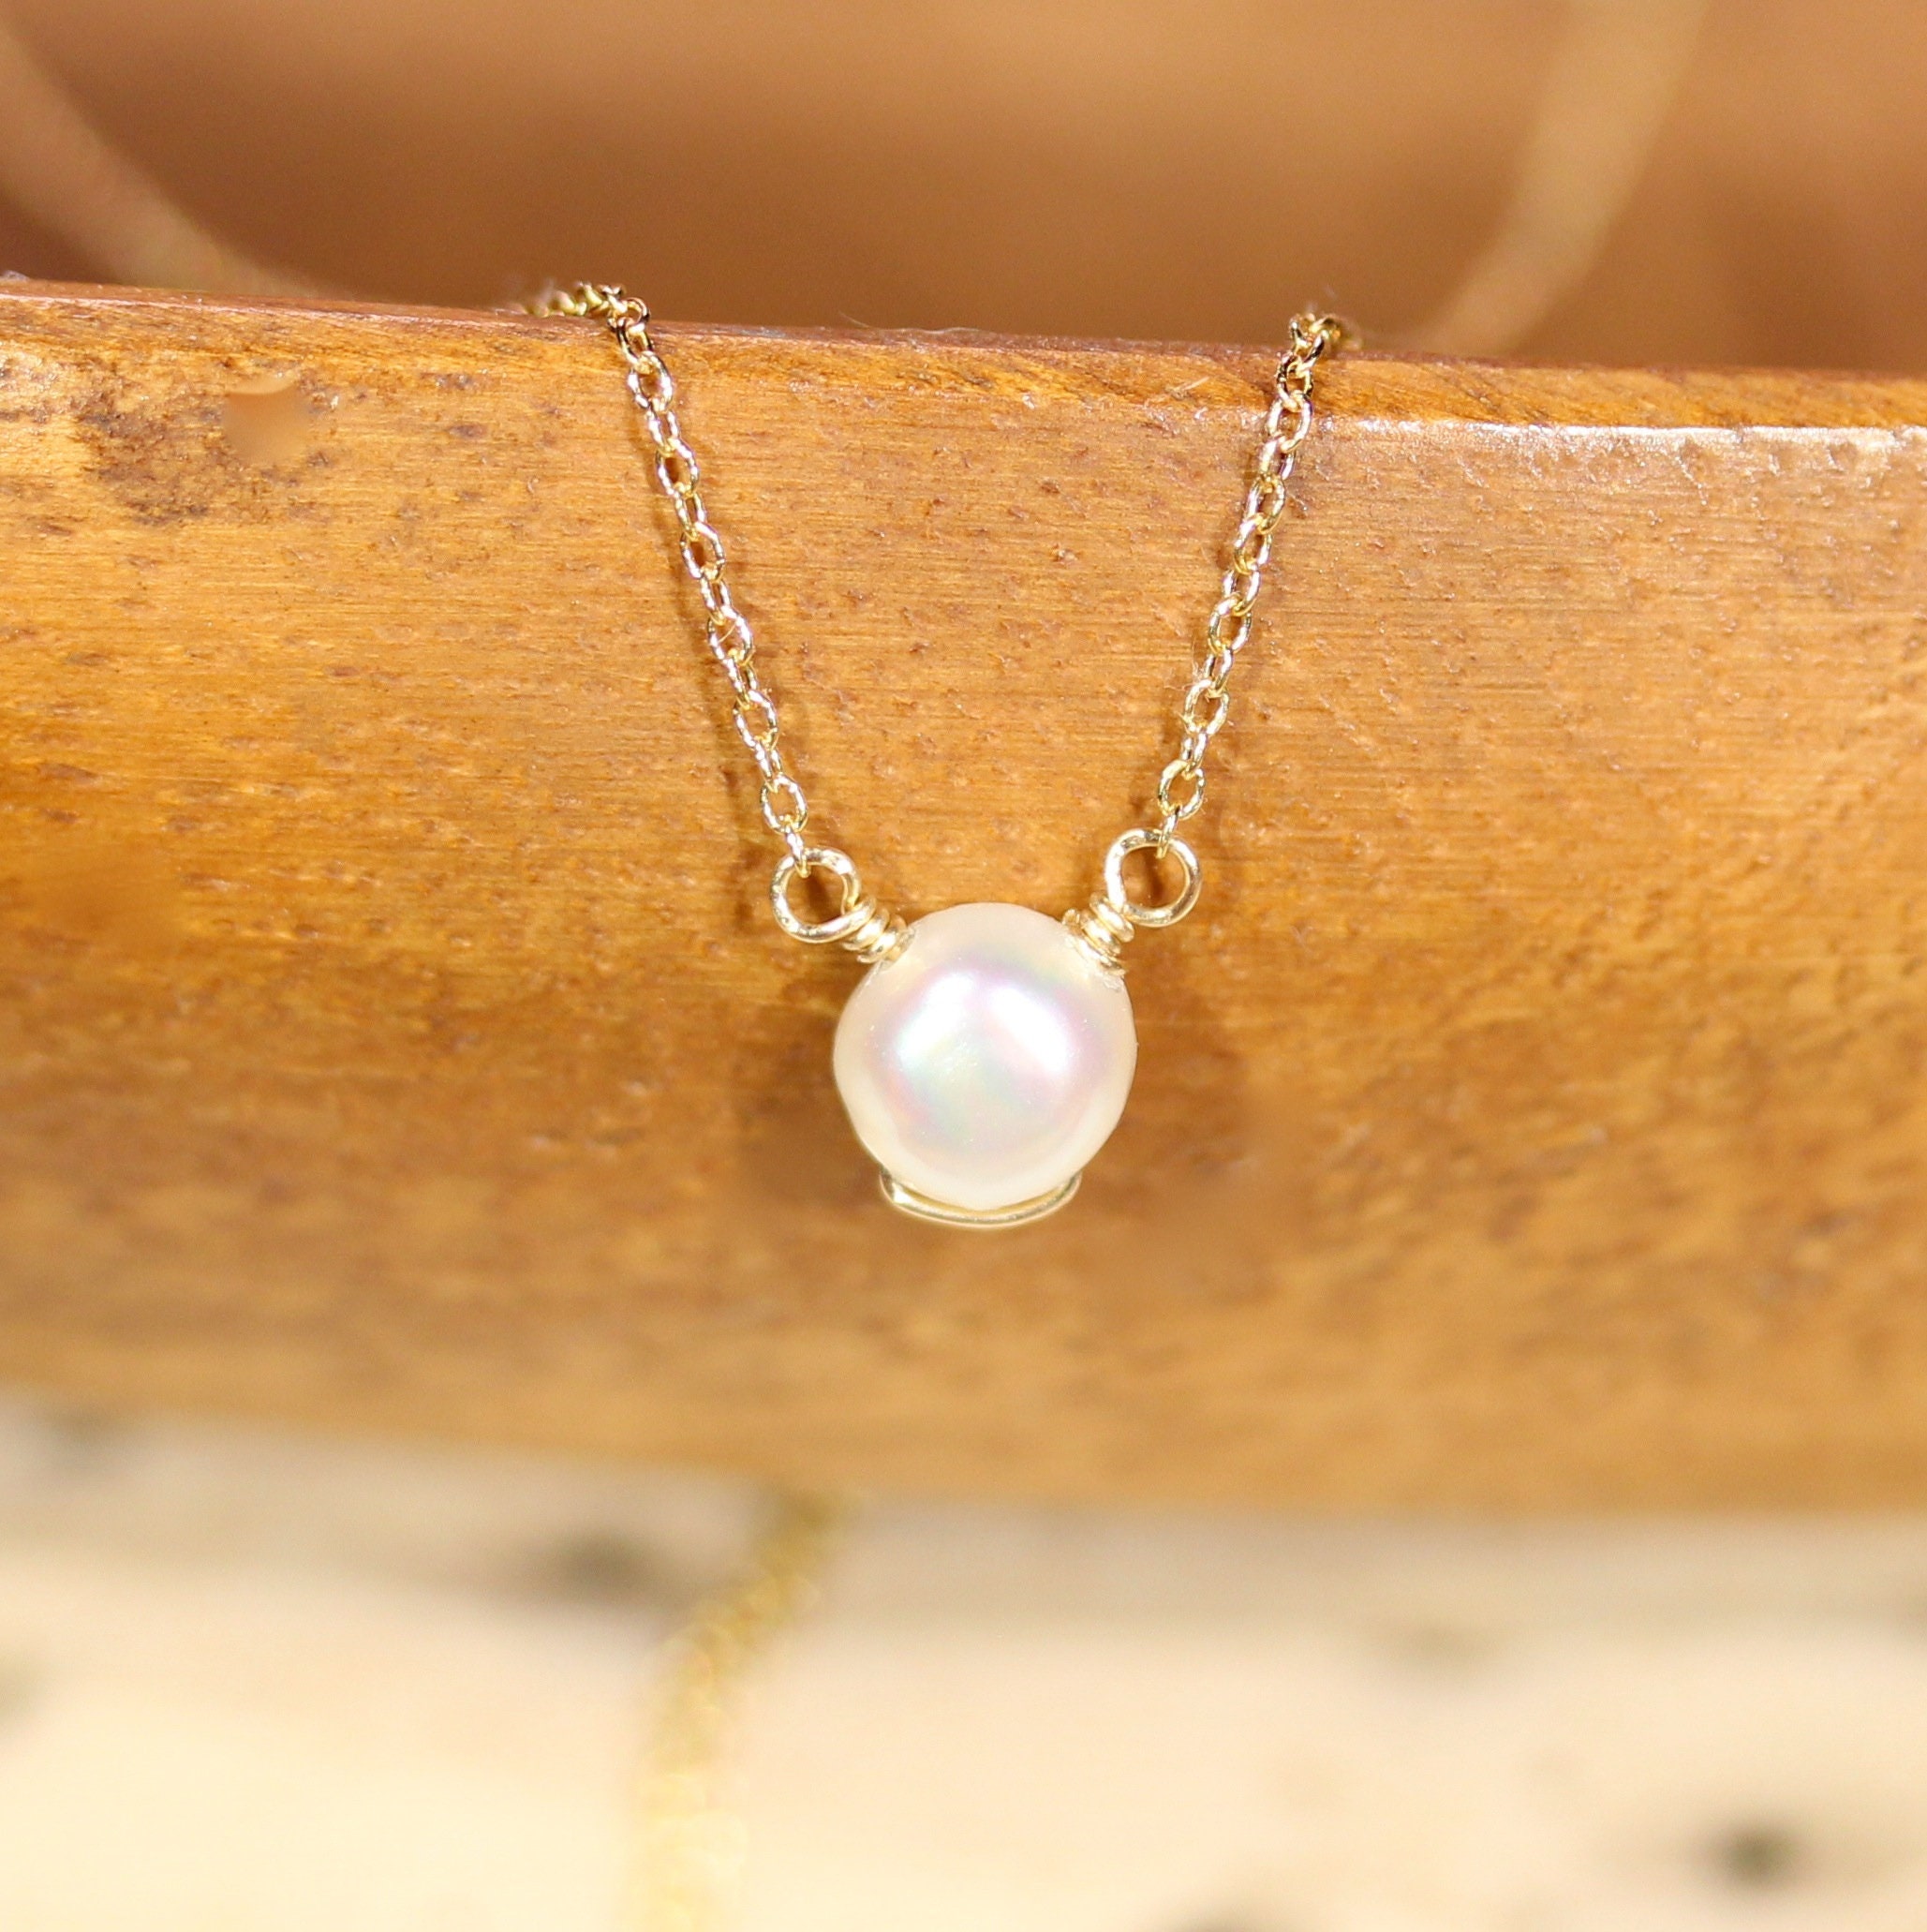 Pearl necklace, white pearl pendant, solitaire necklace, tiny round ...